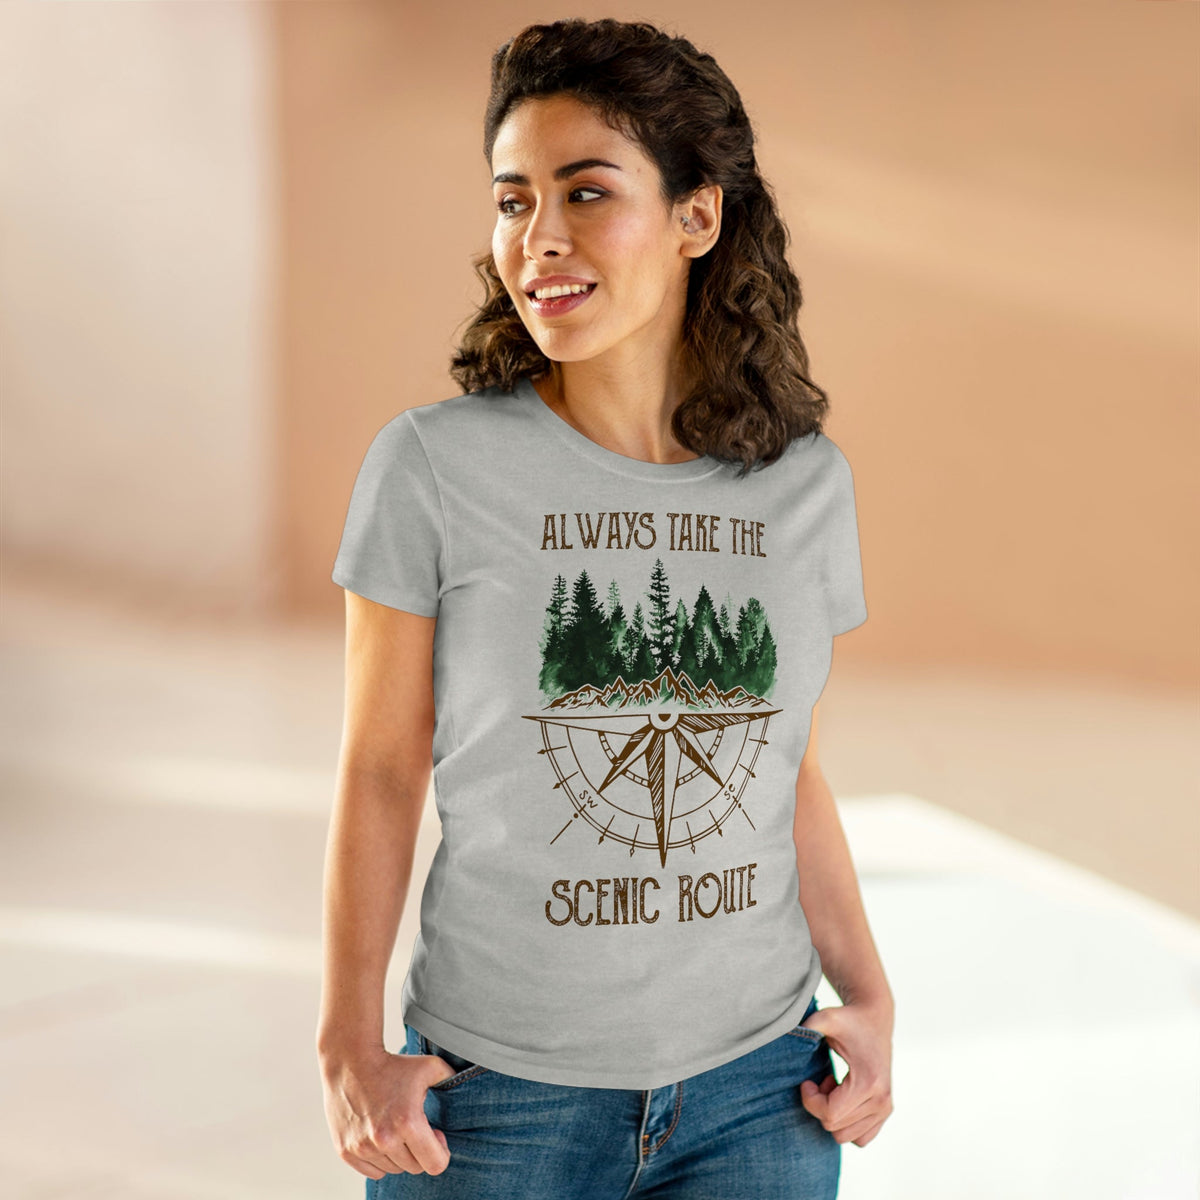 Always Take The Senic Route Women's Midweight Cotton Tee - Salty Medic Clothing Co.